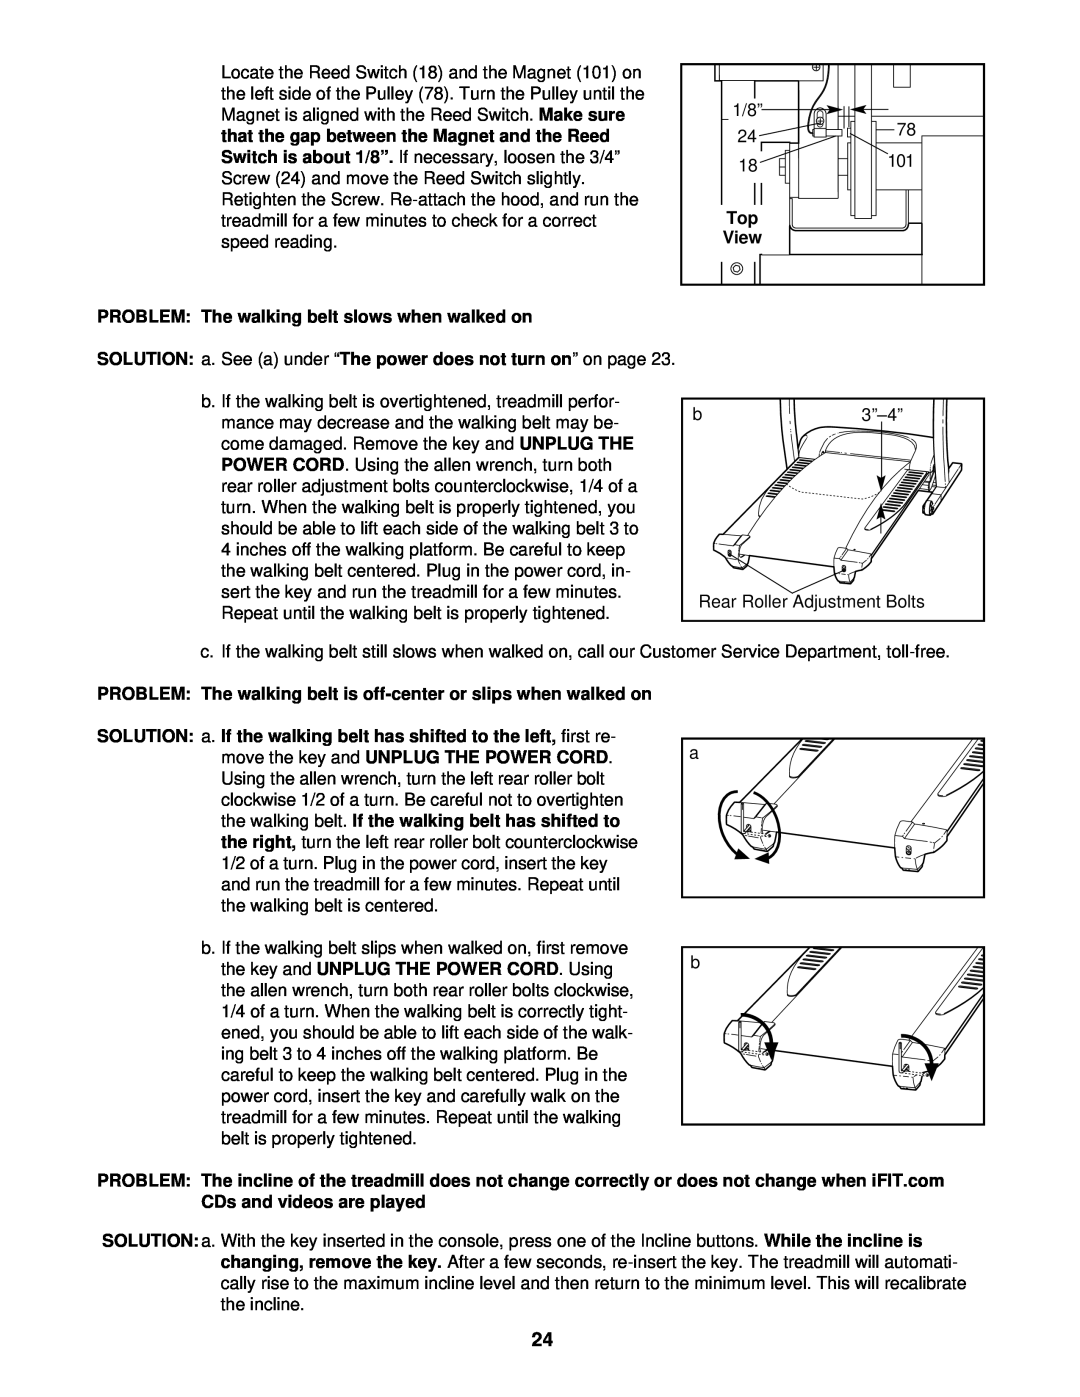 ProForm PFTL69211 user manual PROBLEM The walking belt slows when walked on, View 